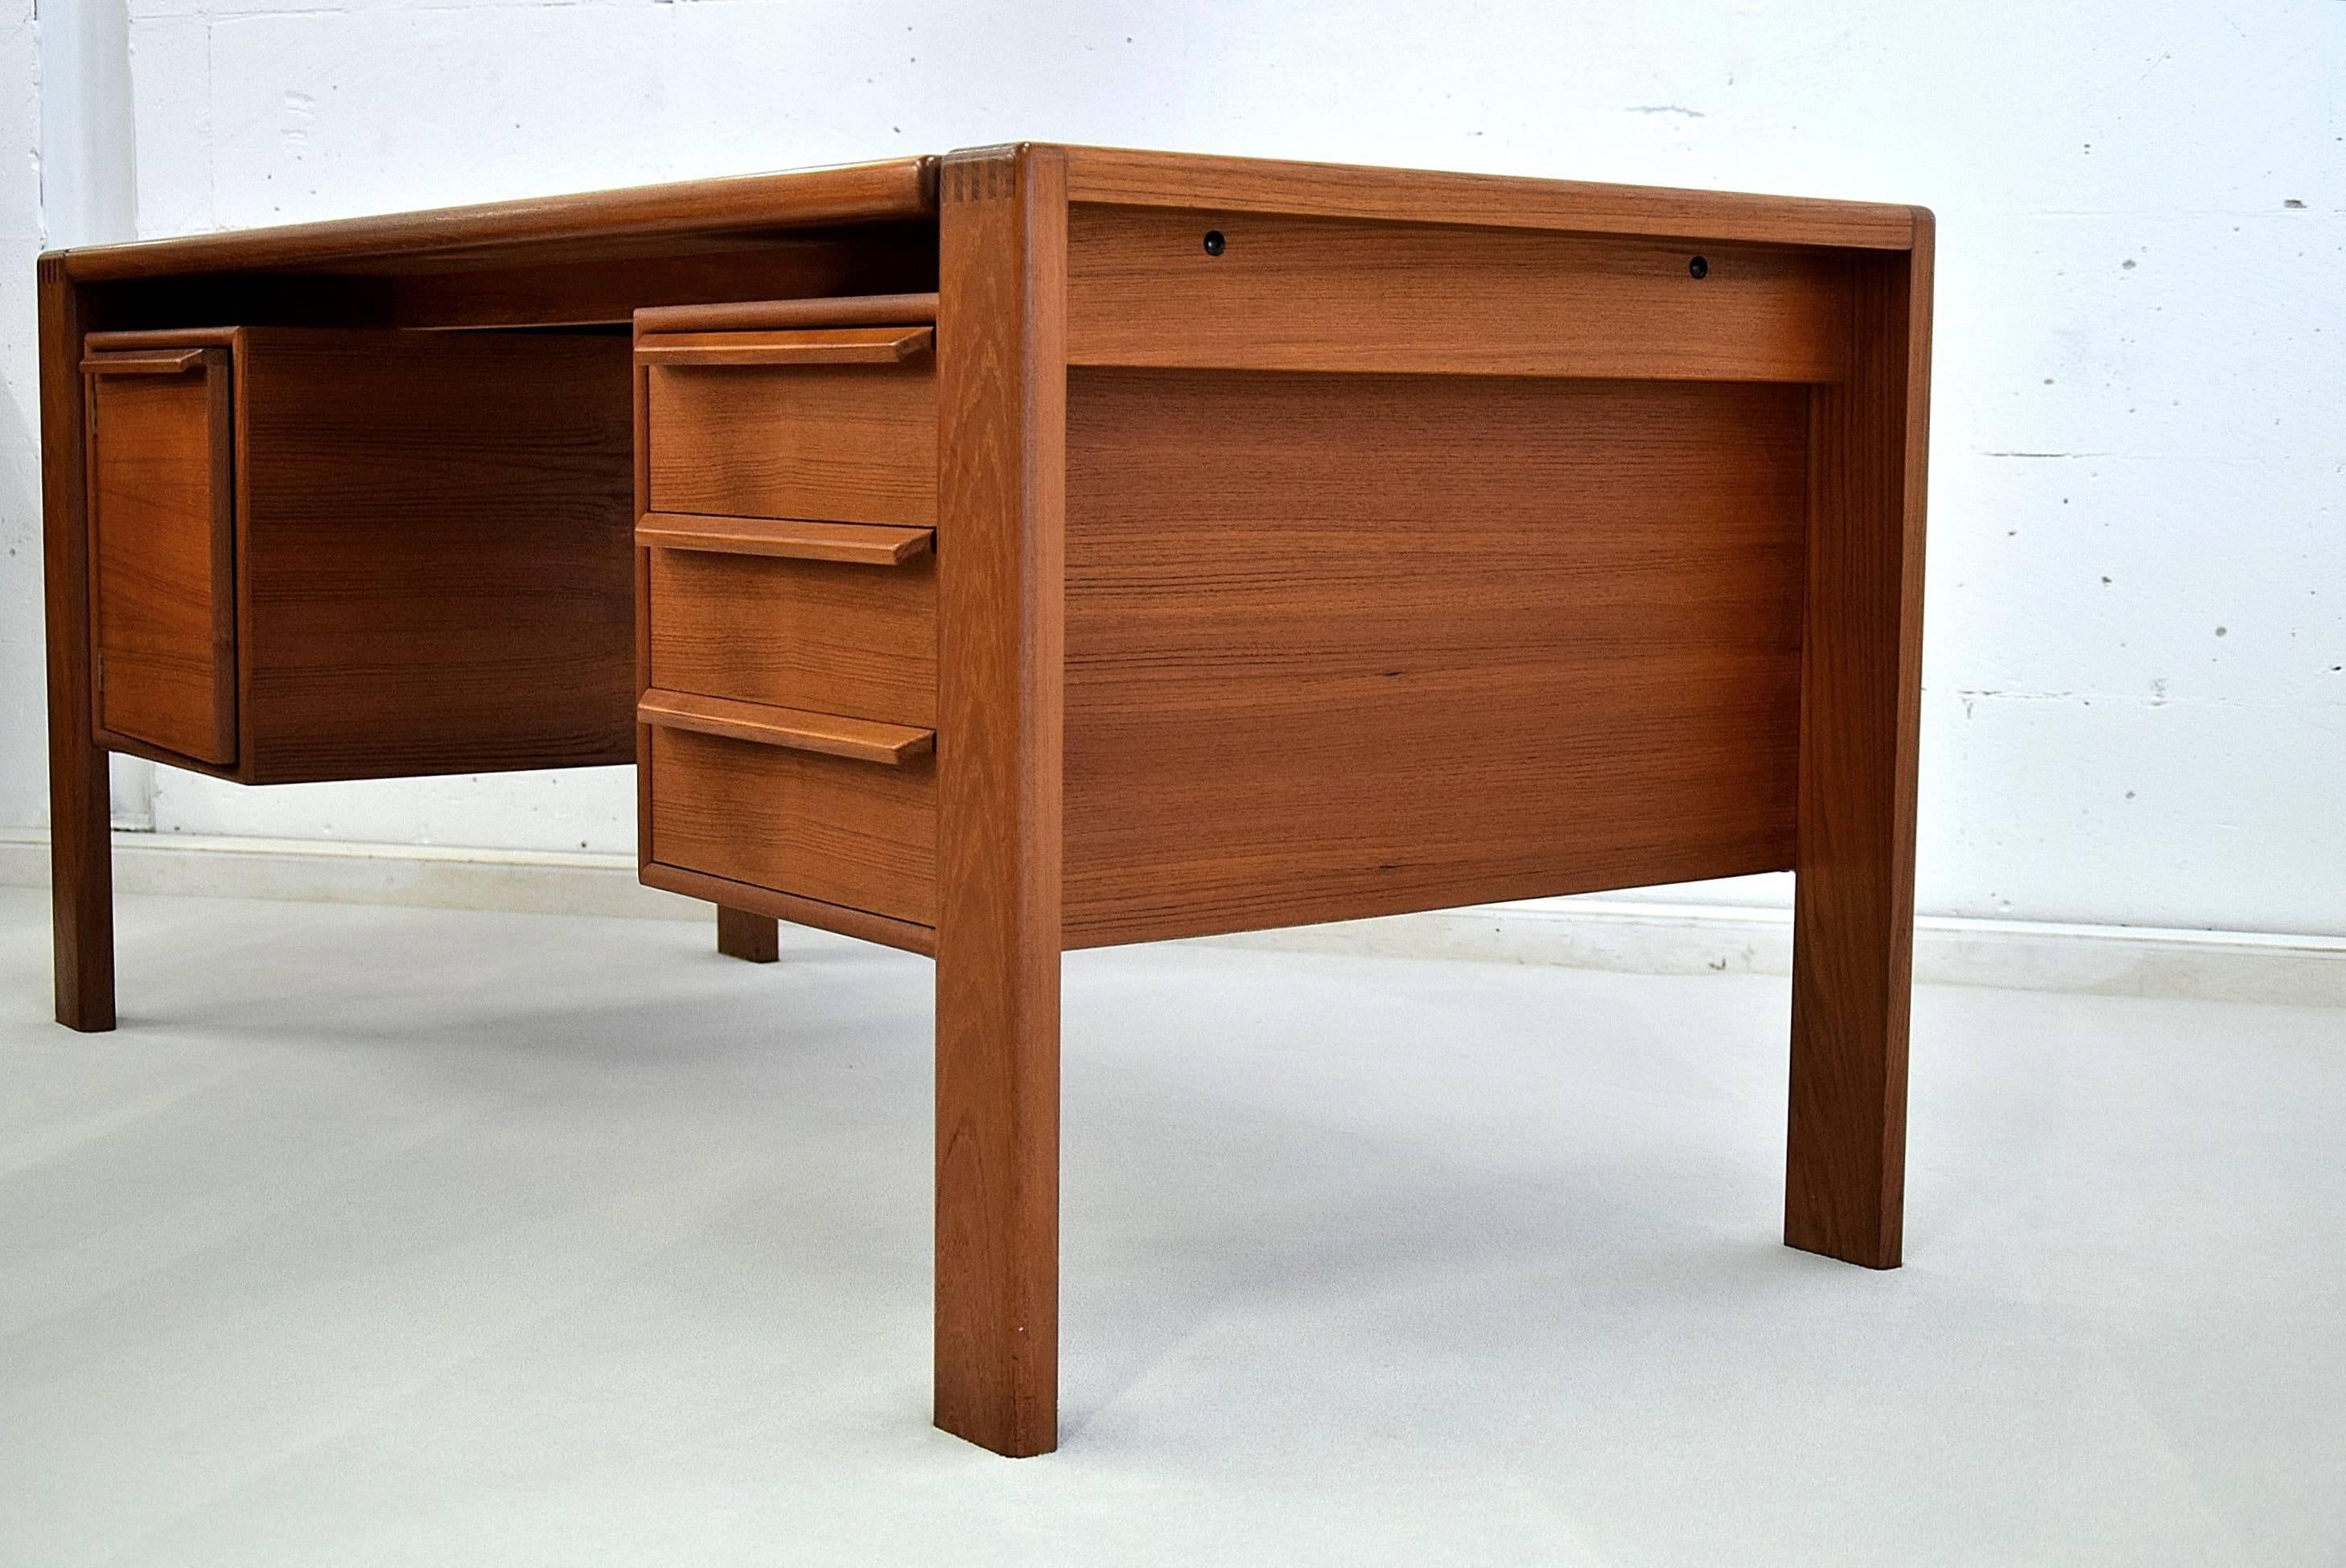 Made in Denmark mid century modern teak desk.
Stylish teak desk with beautiful solid teak top and solid teak legs.
Made by G.V. Møbler in Denmark and in great condition as can be seen from the images.

Measurements: W.163 x D.75 x H.73 cm.
The desk